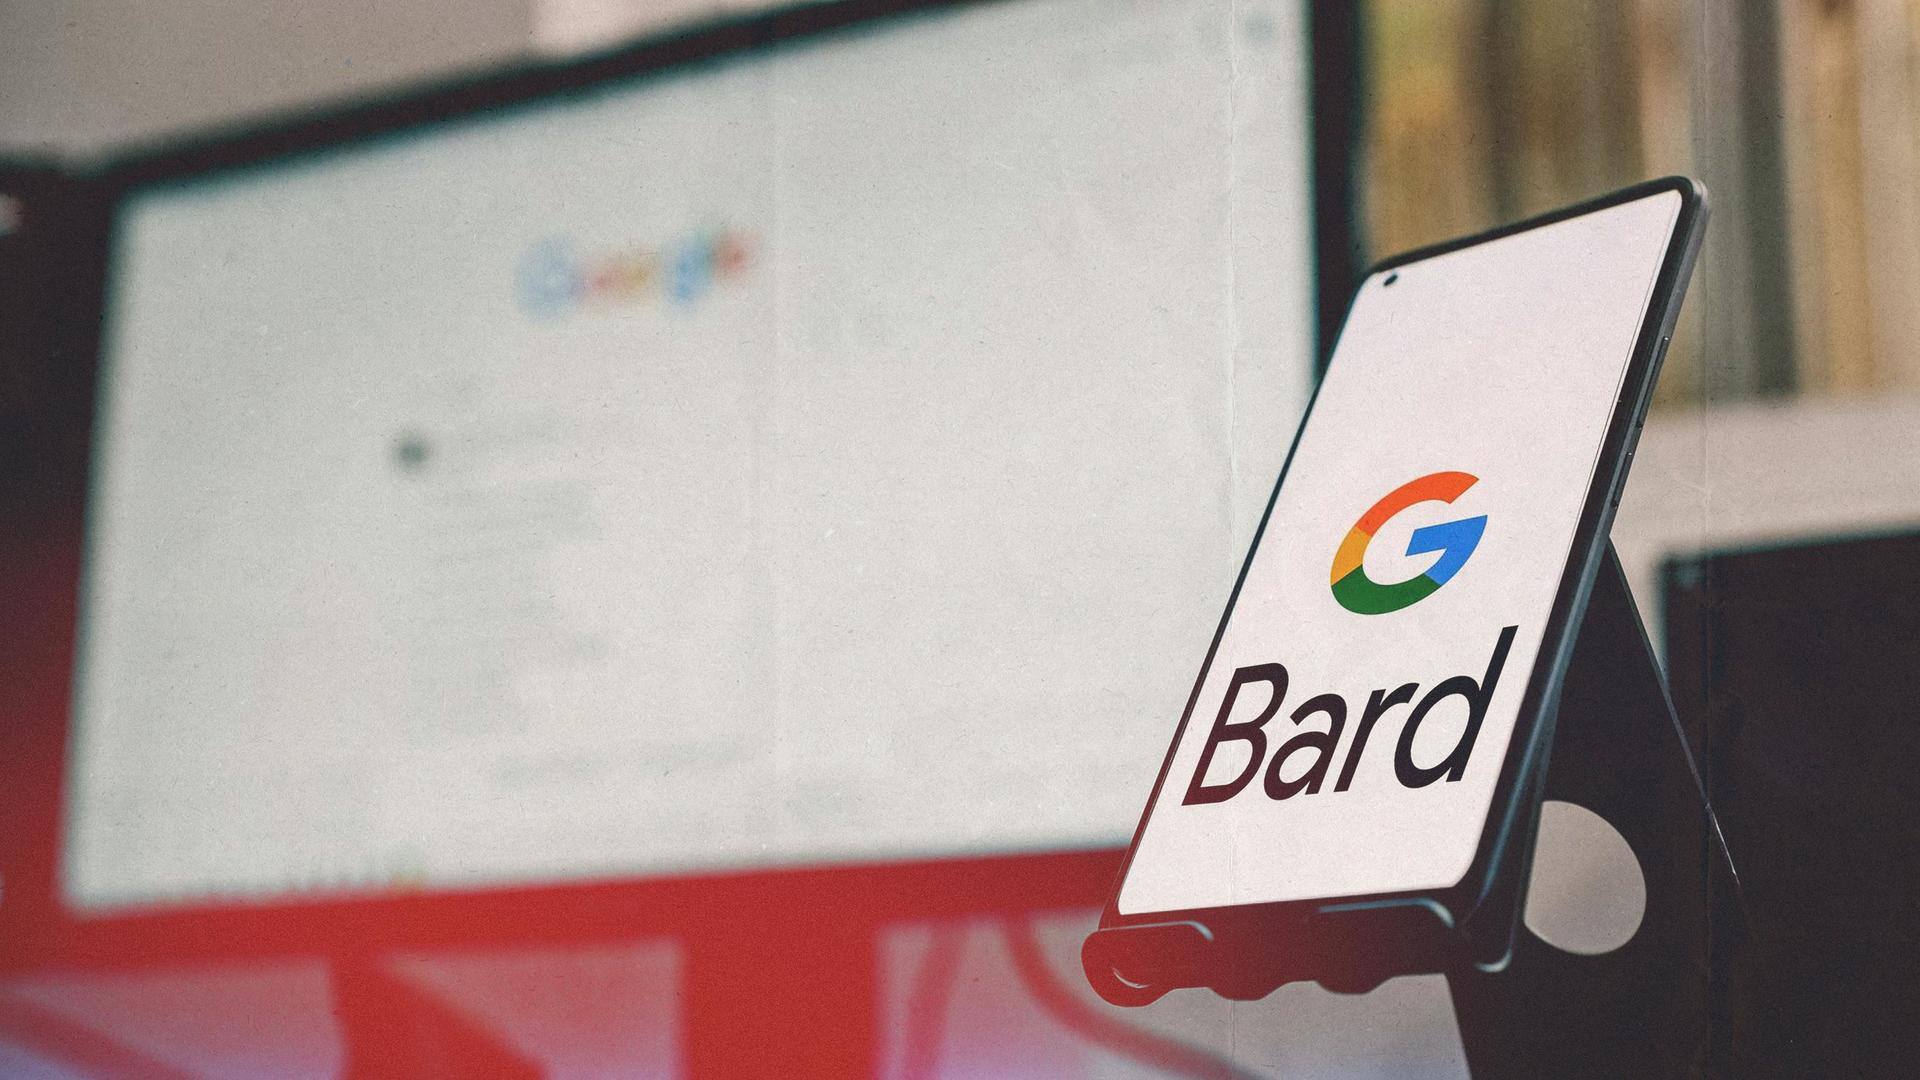 Google Bard: How ChatGPT's rival has improved since initial blunder